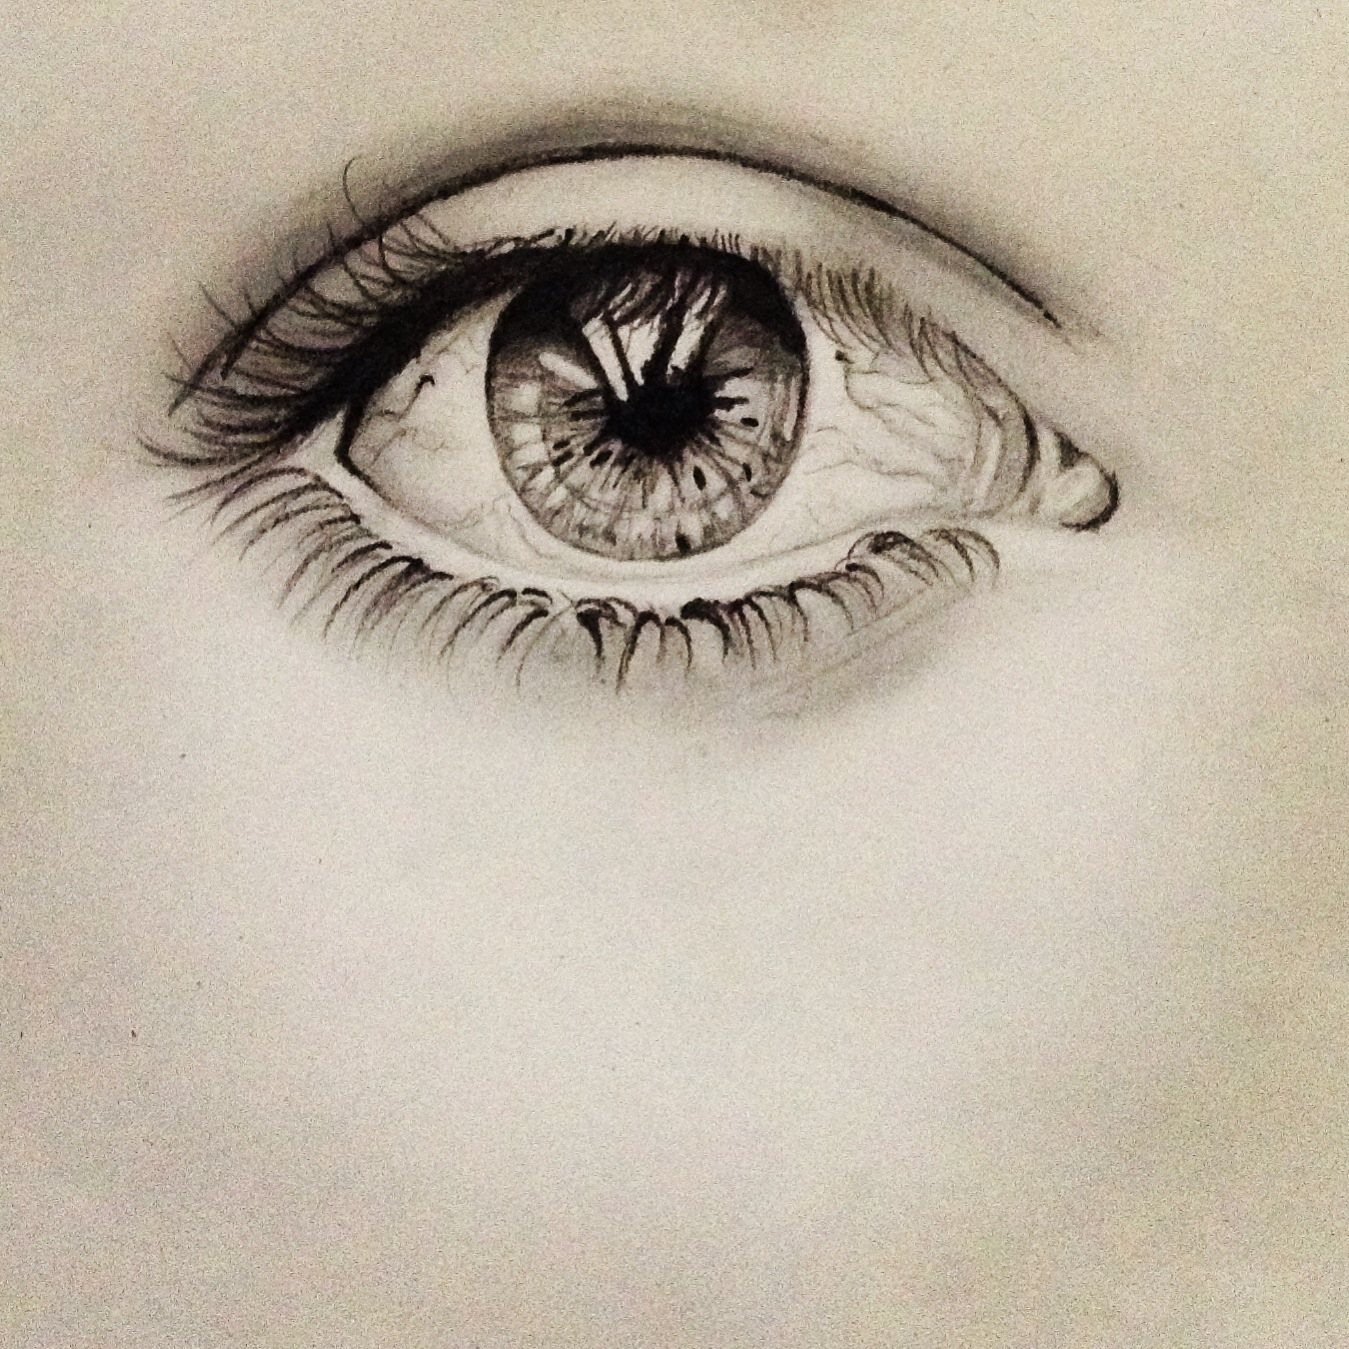  Eye Pencil Sketch Drawing for Adult